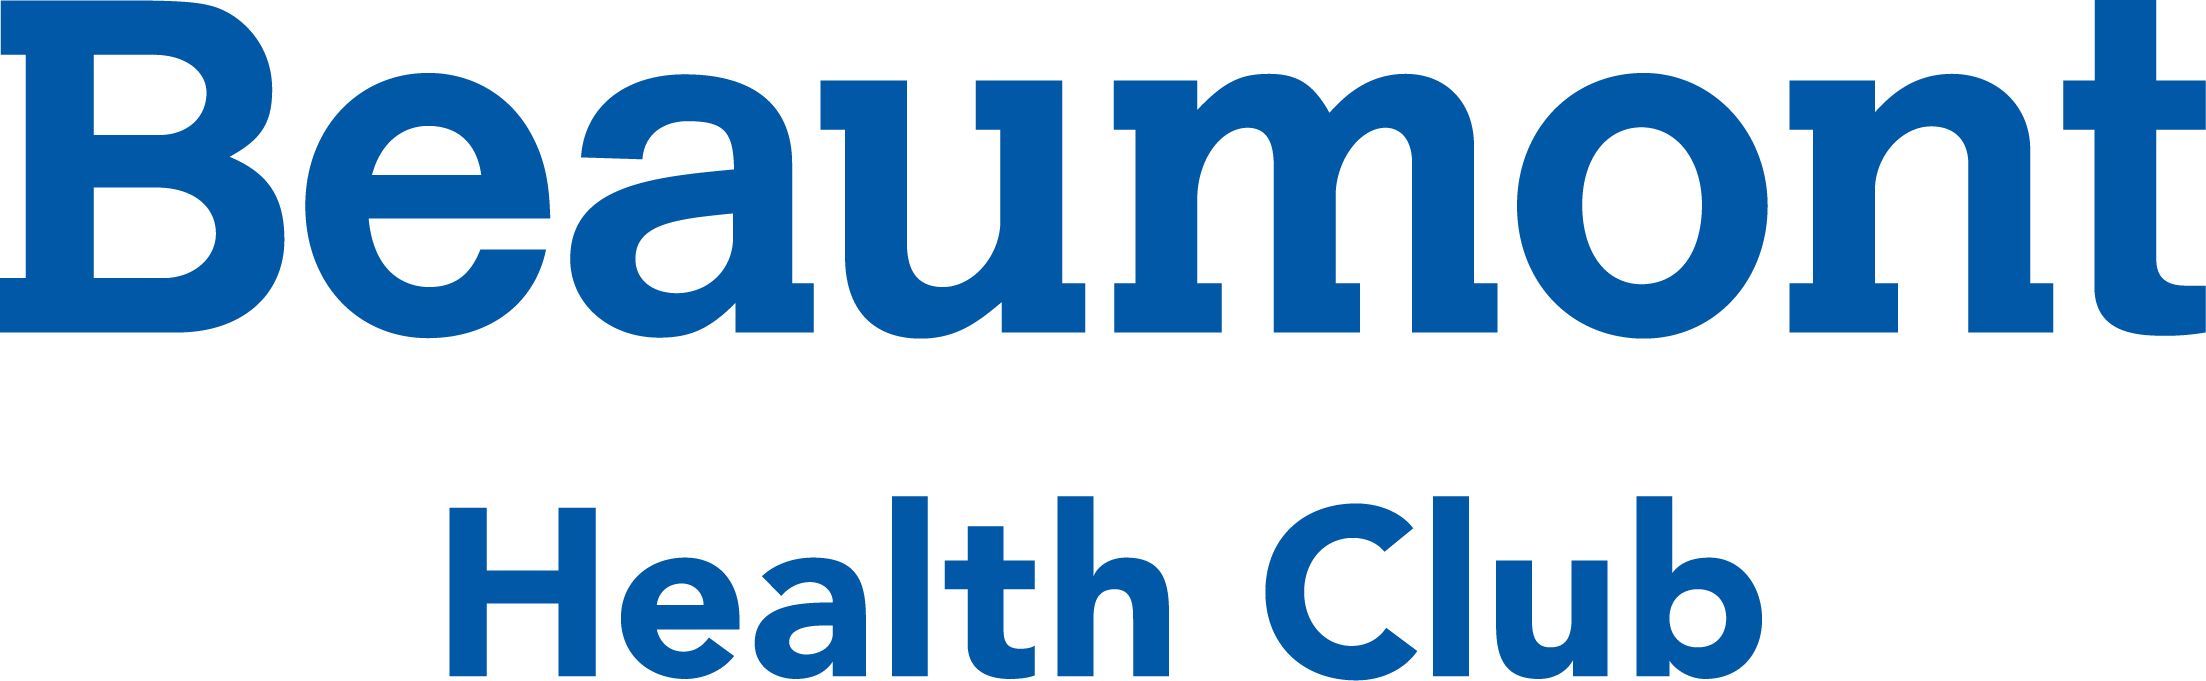 Beaumont Outpatient Logo - Home | Beaumont Health Club In Rochester Hills | Gym Near Troy